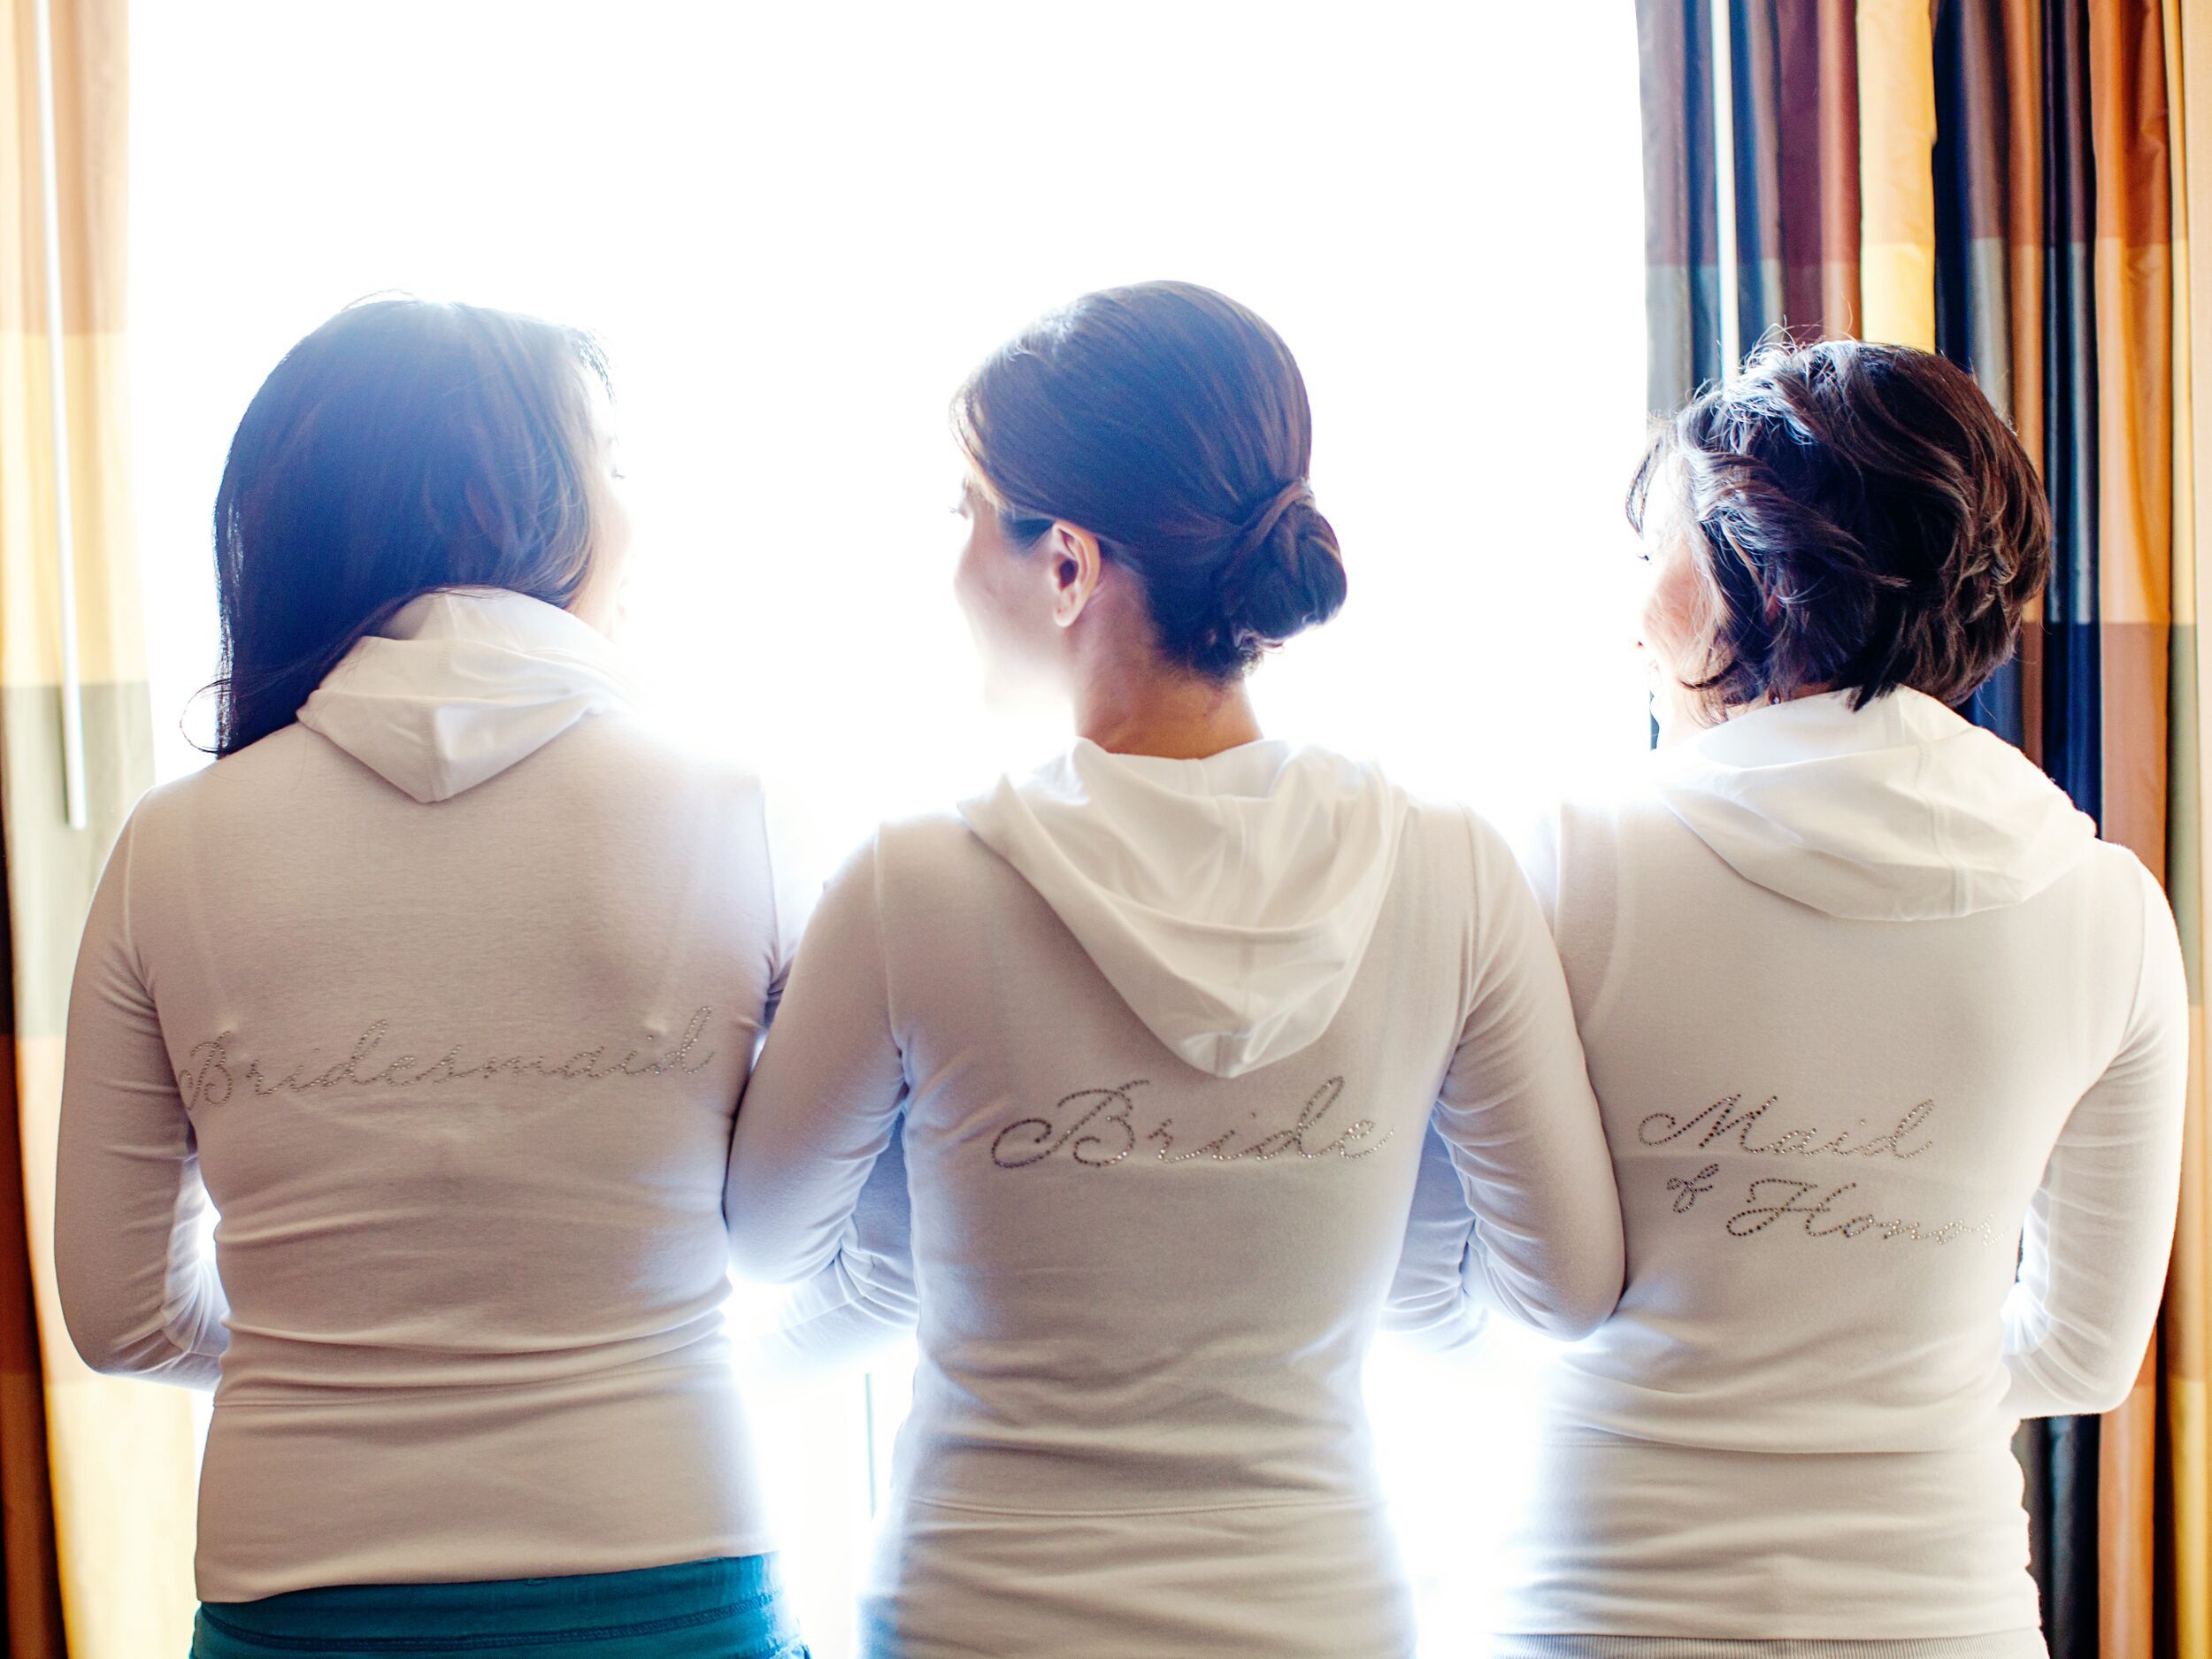 Bride and bridesmaids in matching white hoodies -   Great Personalized Bridesmaid Gifts